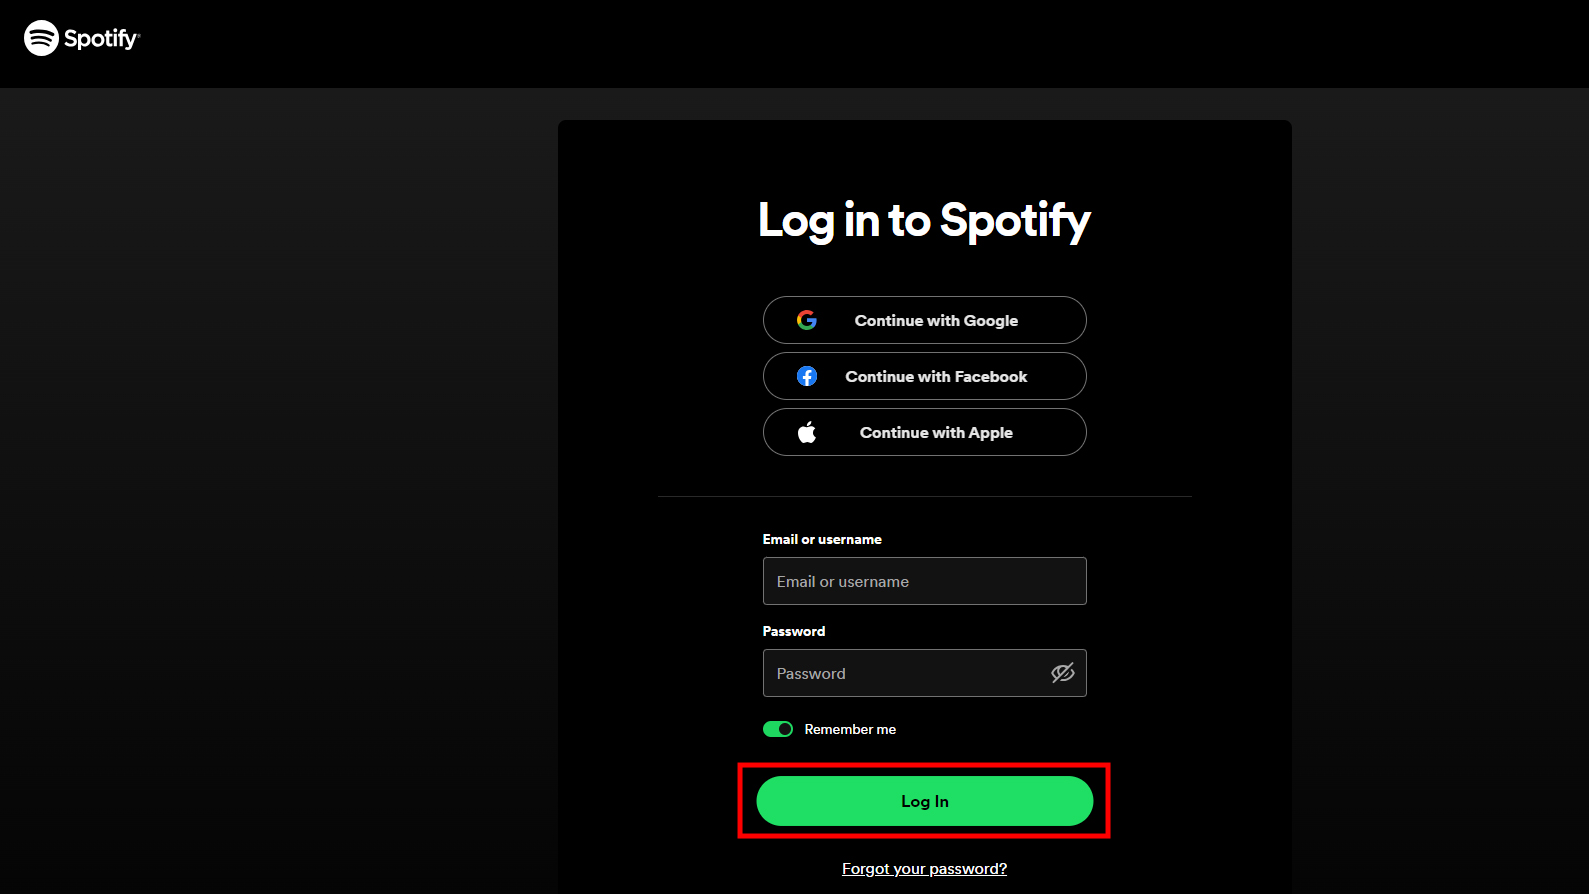 Log out and log back into Spotify (4)